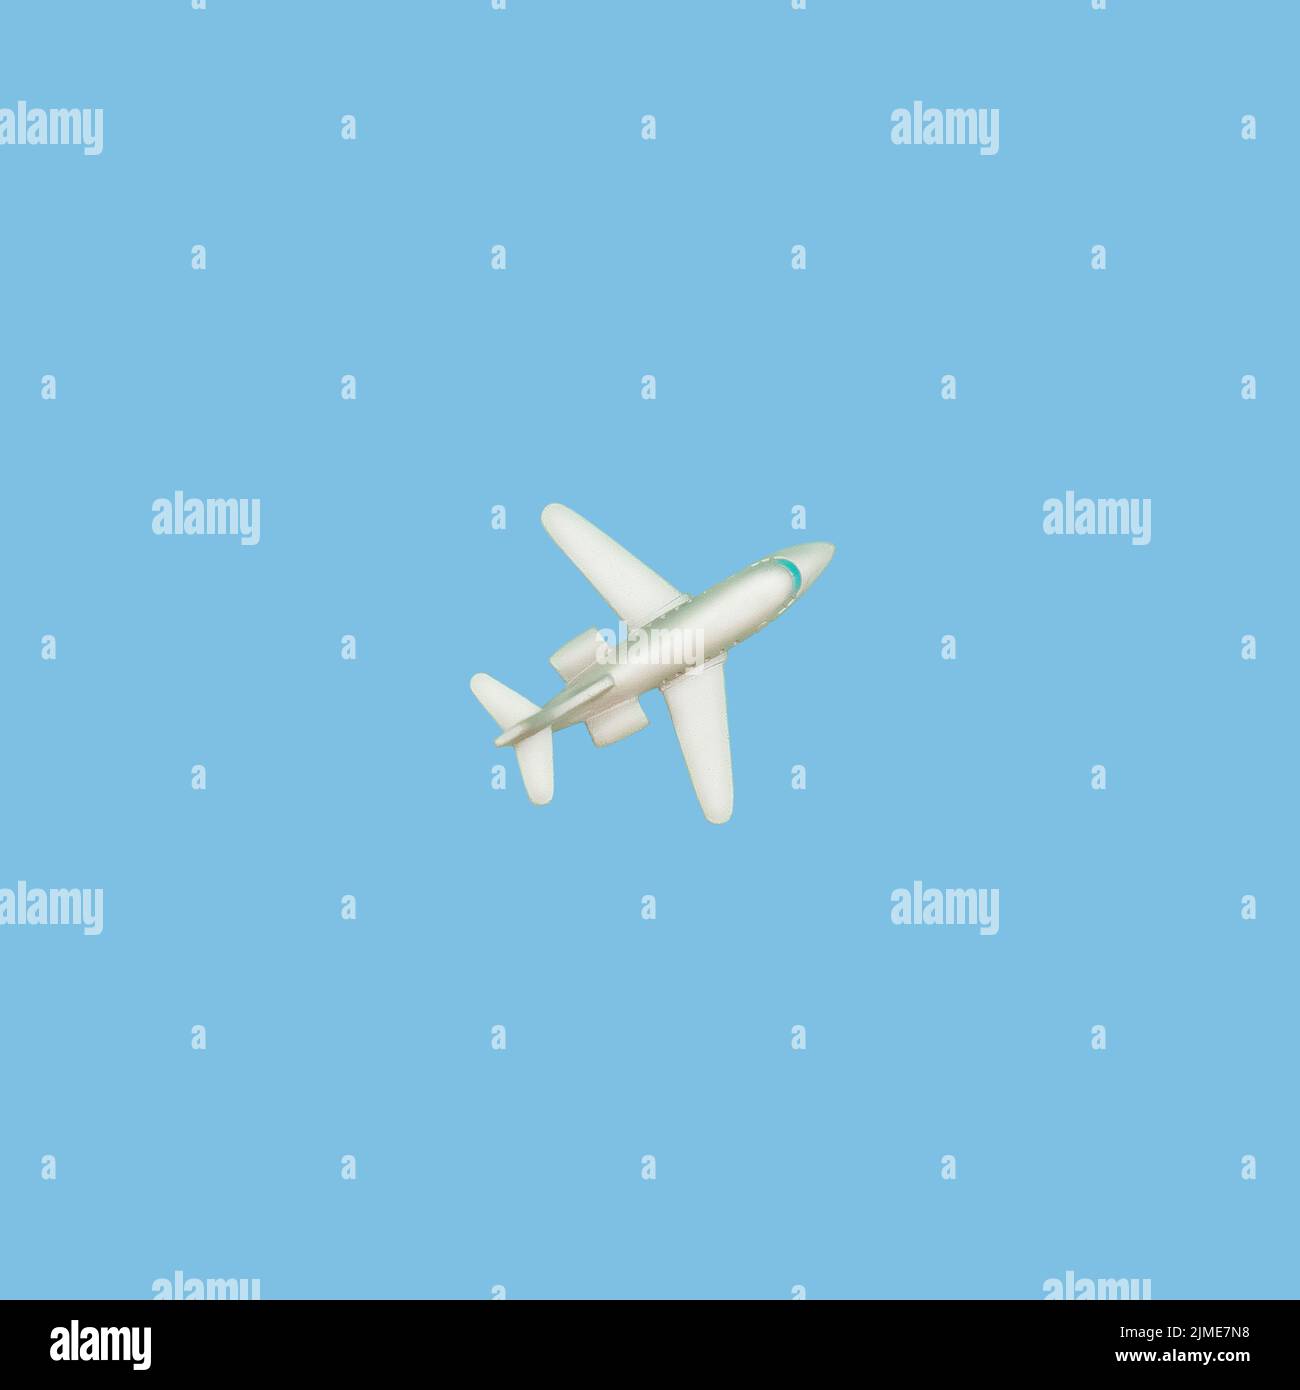 White Paper Airplane in a Blue Sky with Clouds. the Message Symbol in the  Messenger Stock Image - Image of launch, cyber: 115071925